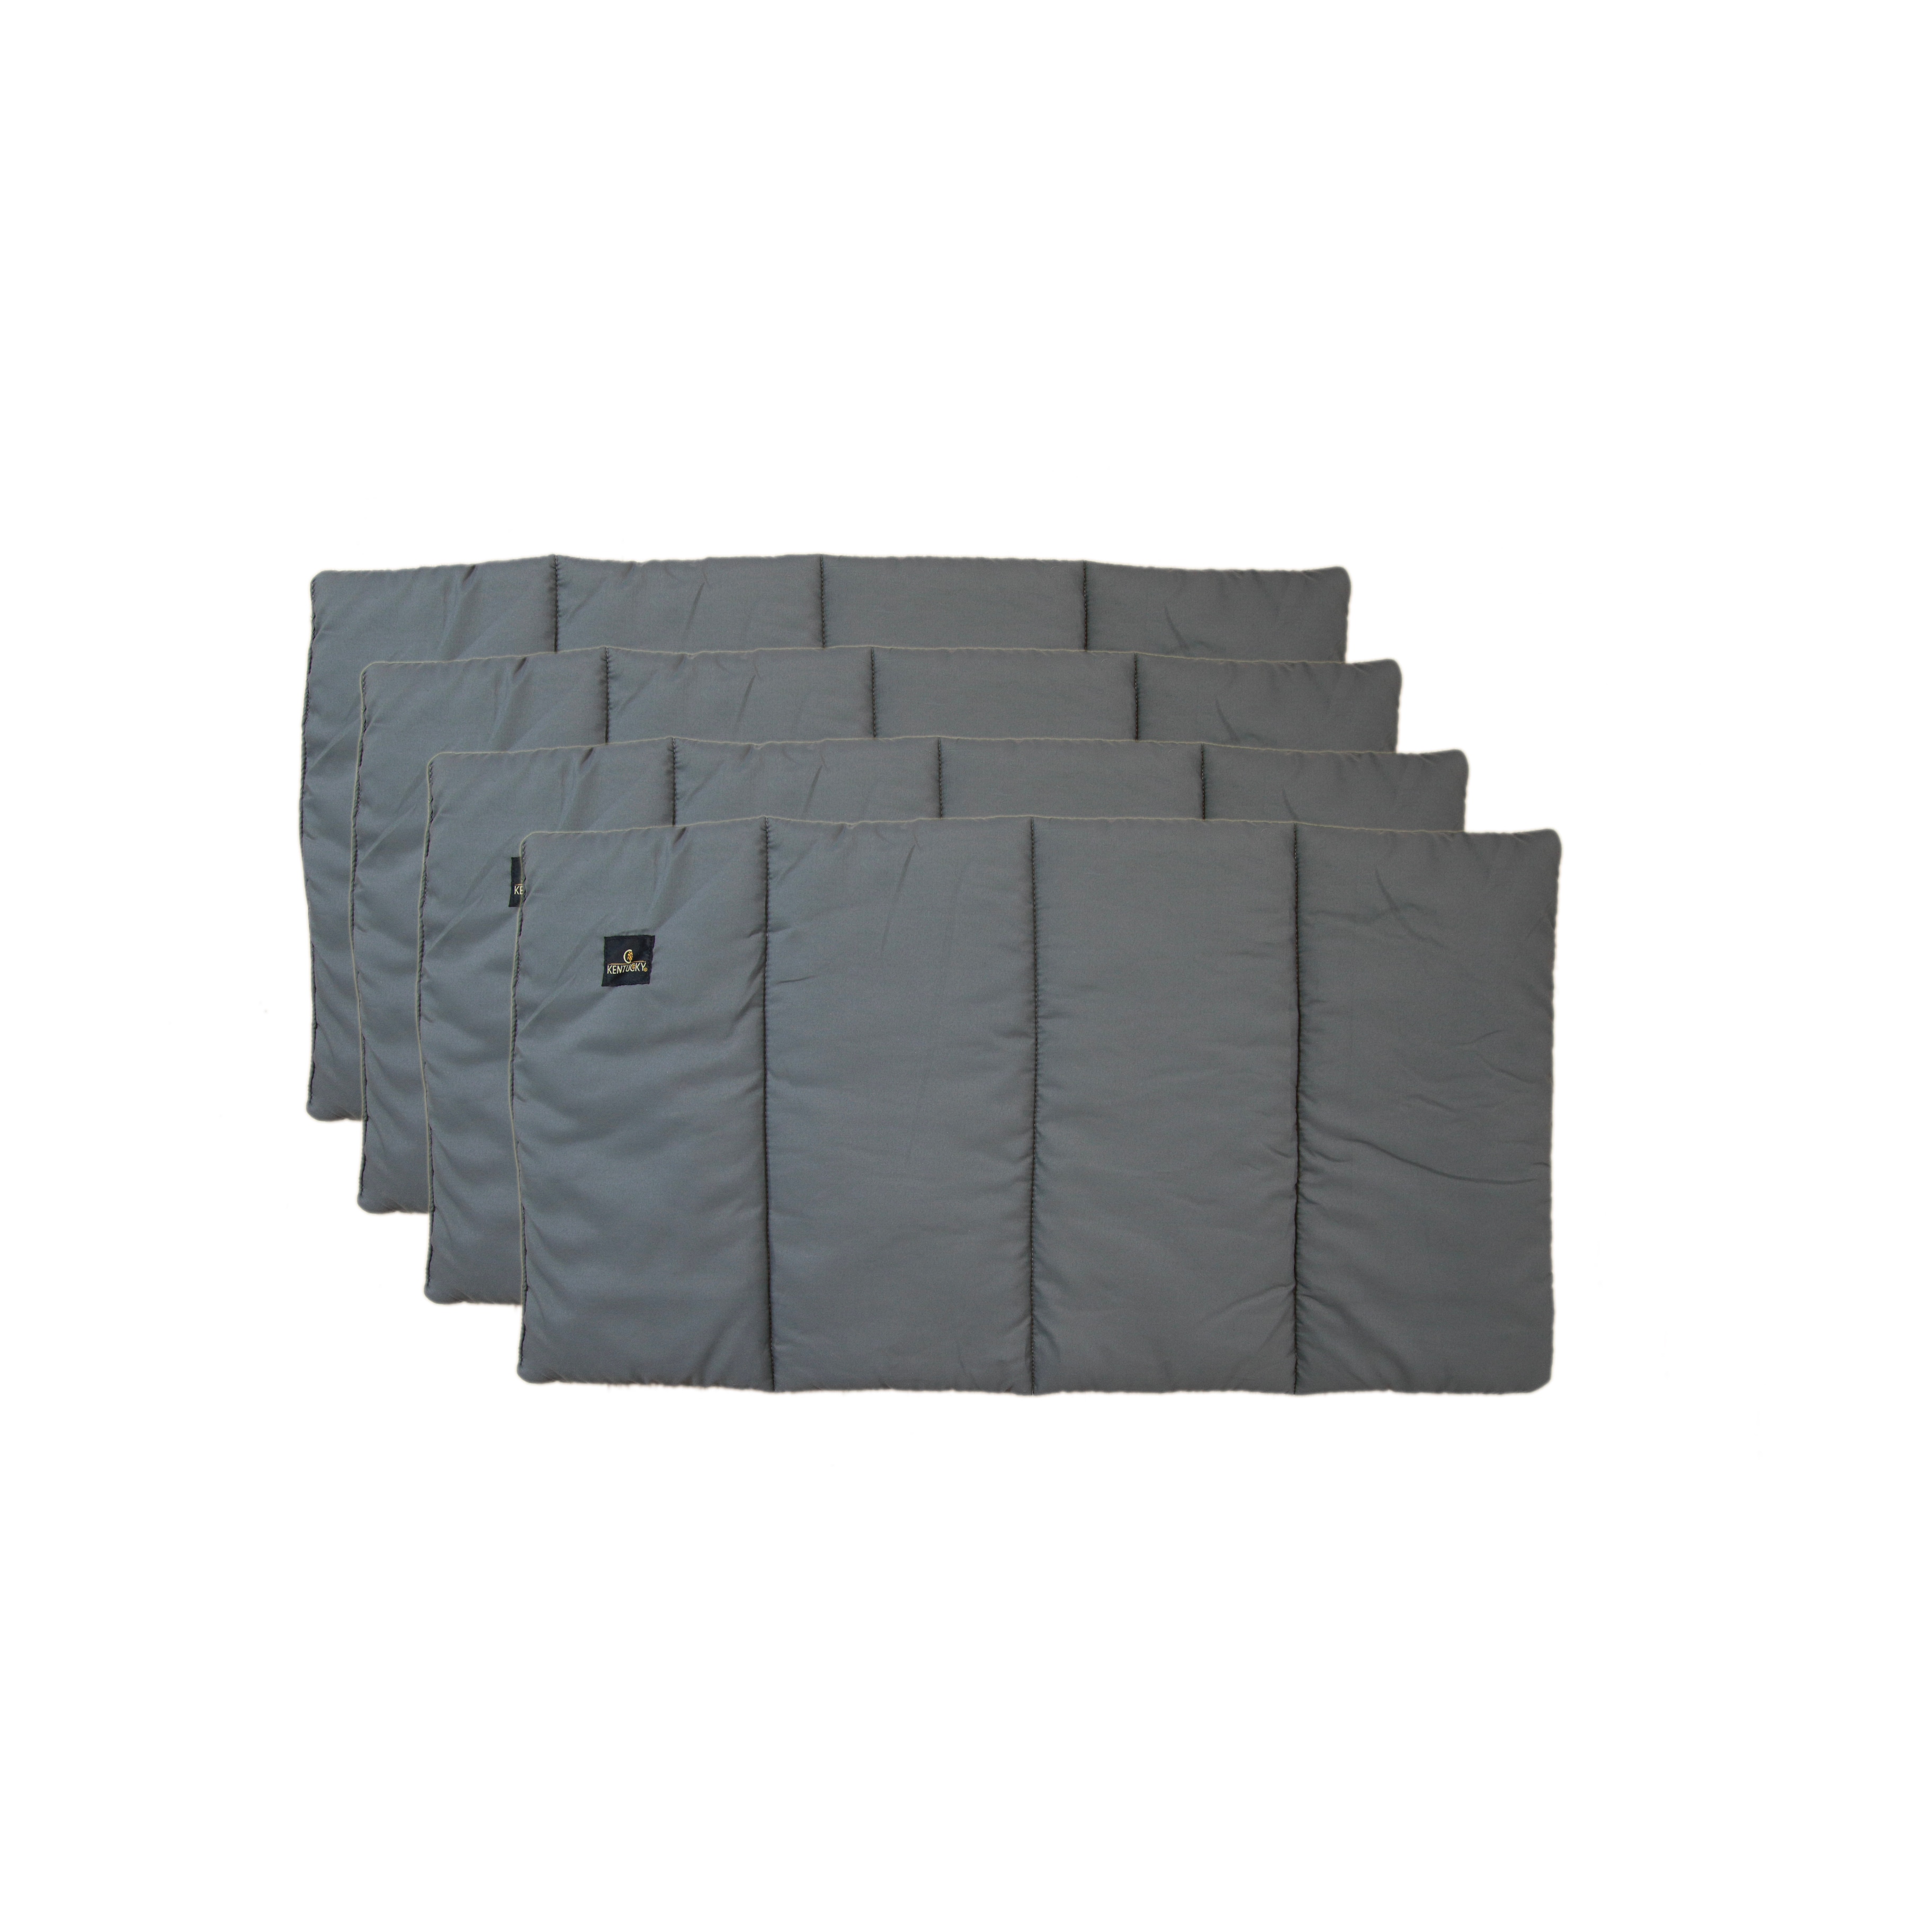 Stable Bandage Pads - Grey